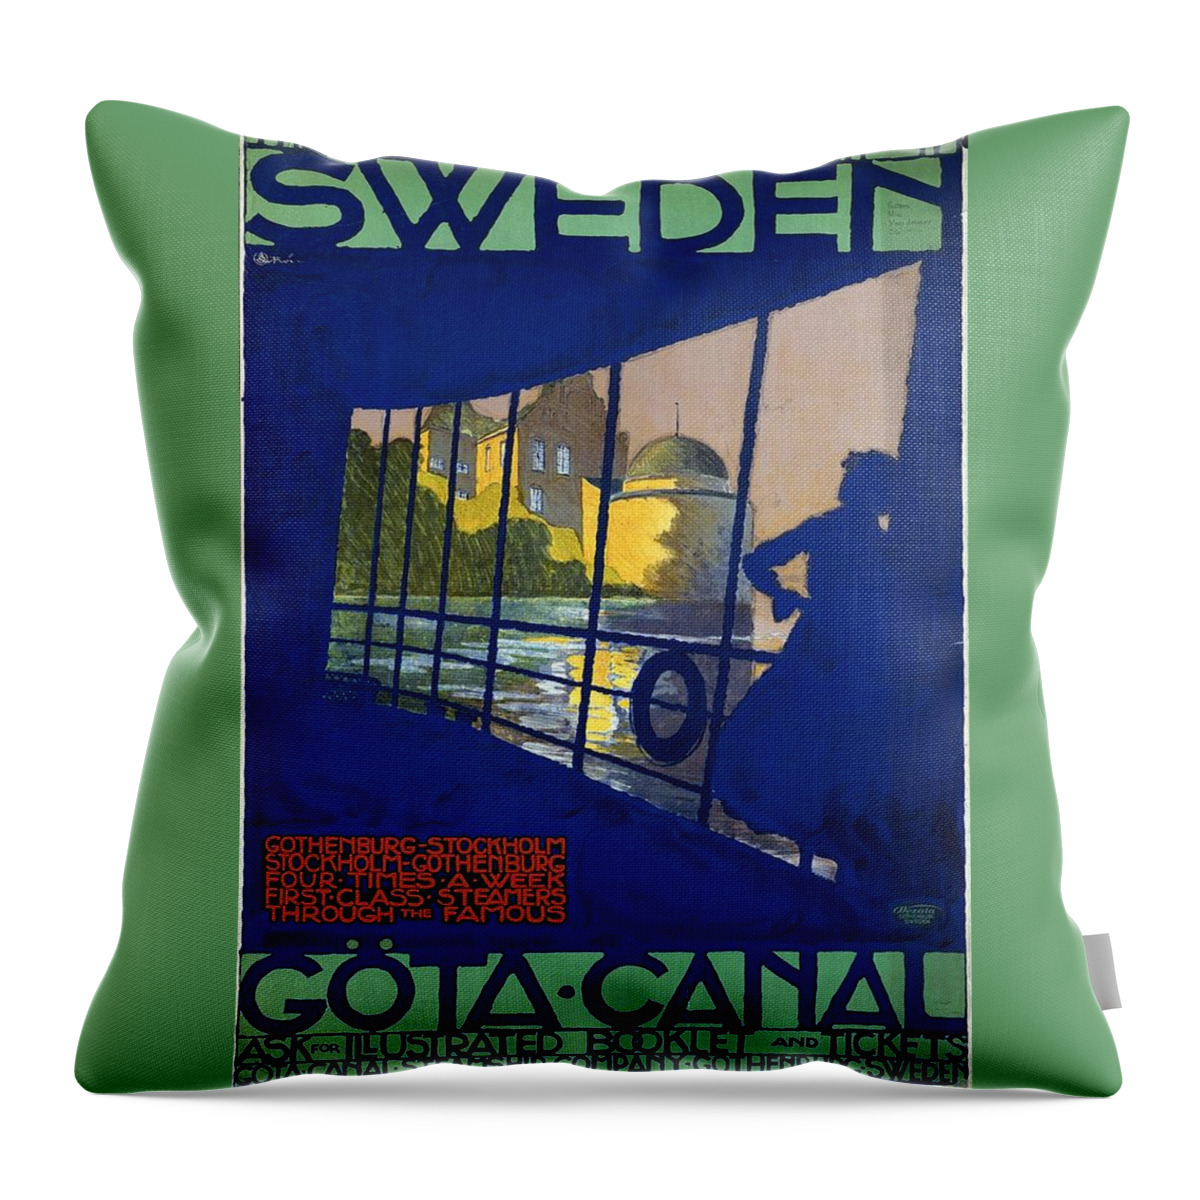 Gota Canal Throw Pillow featuring the photograph The Most Picturesque Trip in Sweden - Gota Canal - Retro travel Poster - Vintage Poster by Studio Grafiikka